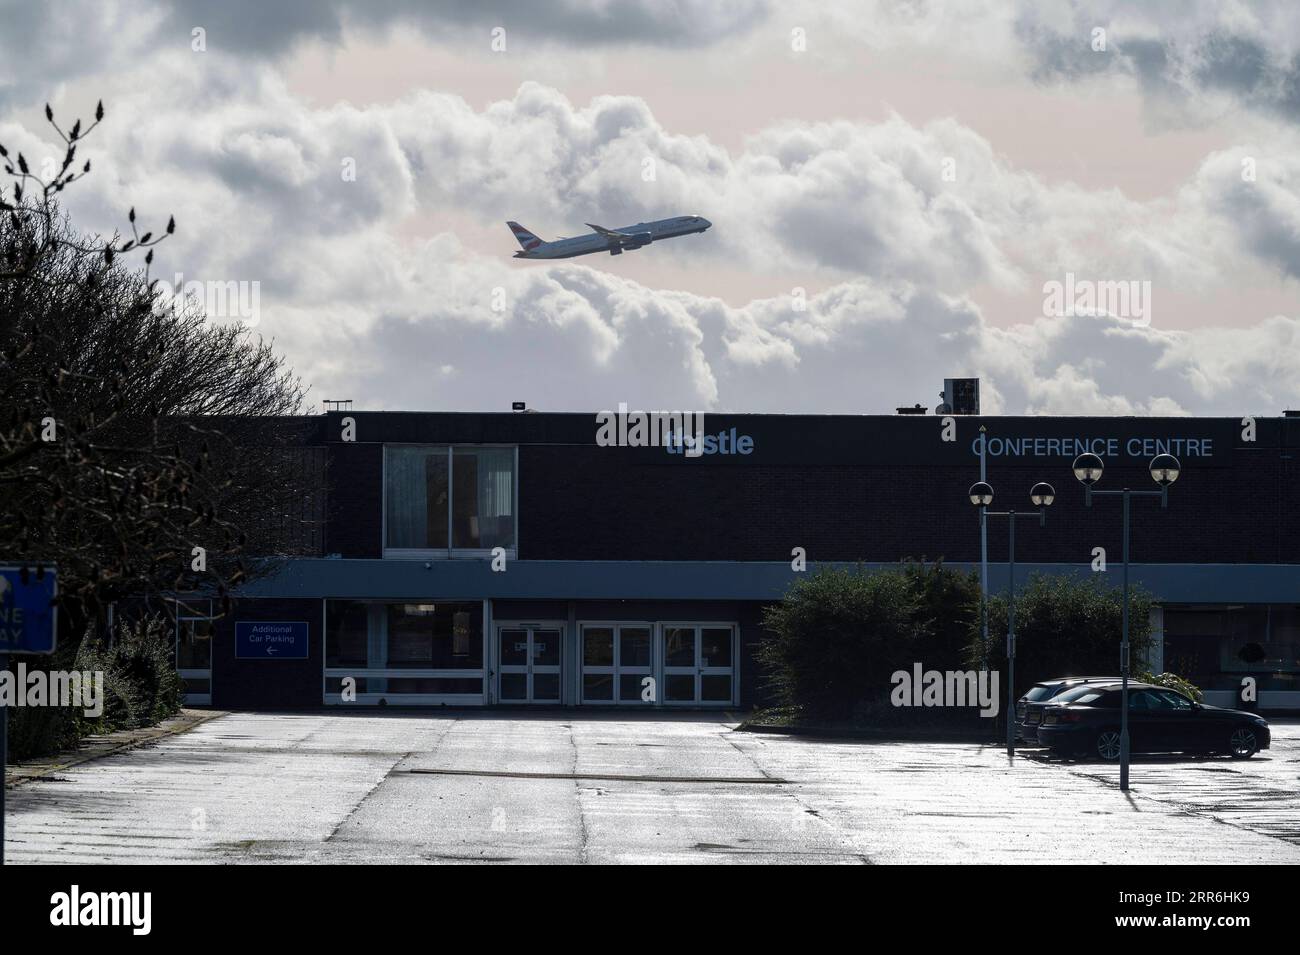 210217 -- BEIJING, Feb. 17, 2021 -- An airplane flies over a hotel near Heathrow Airport in London, Britain, Feb. 15, 2021. From Monday, all British and Irish citizens and British residents who arrive in England after being in the red list of more than 30 high-risk countries now have to self-isolate in hotels. The red list countries include South Africa, Portugal and South American nations. Photo by /Xinhua XINHUA PHOTOS OF THE DAY RayxTang PUBLICATIONxNOTxINxCHN Stock Photo